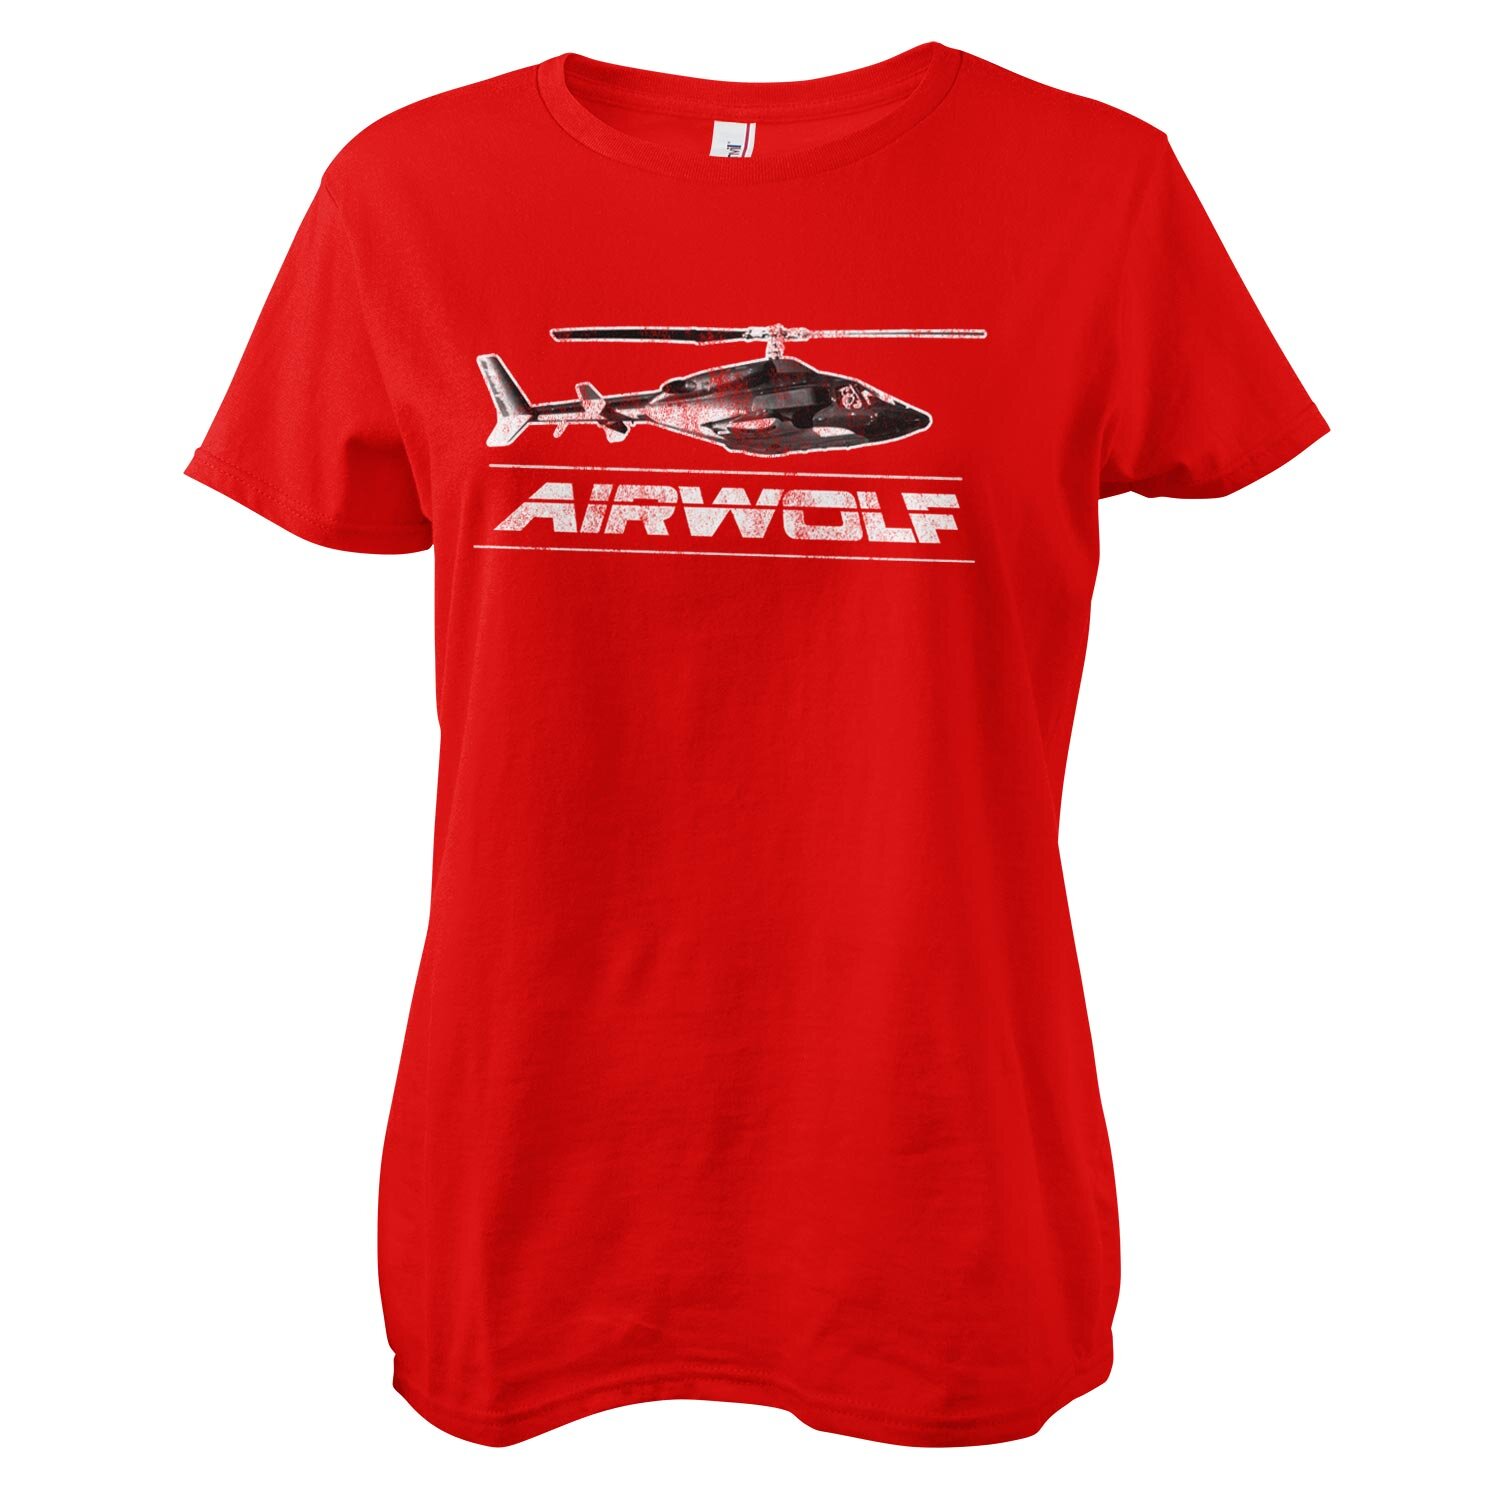 Airwolf Distressed Girly Tee